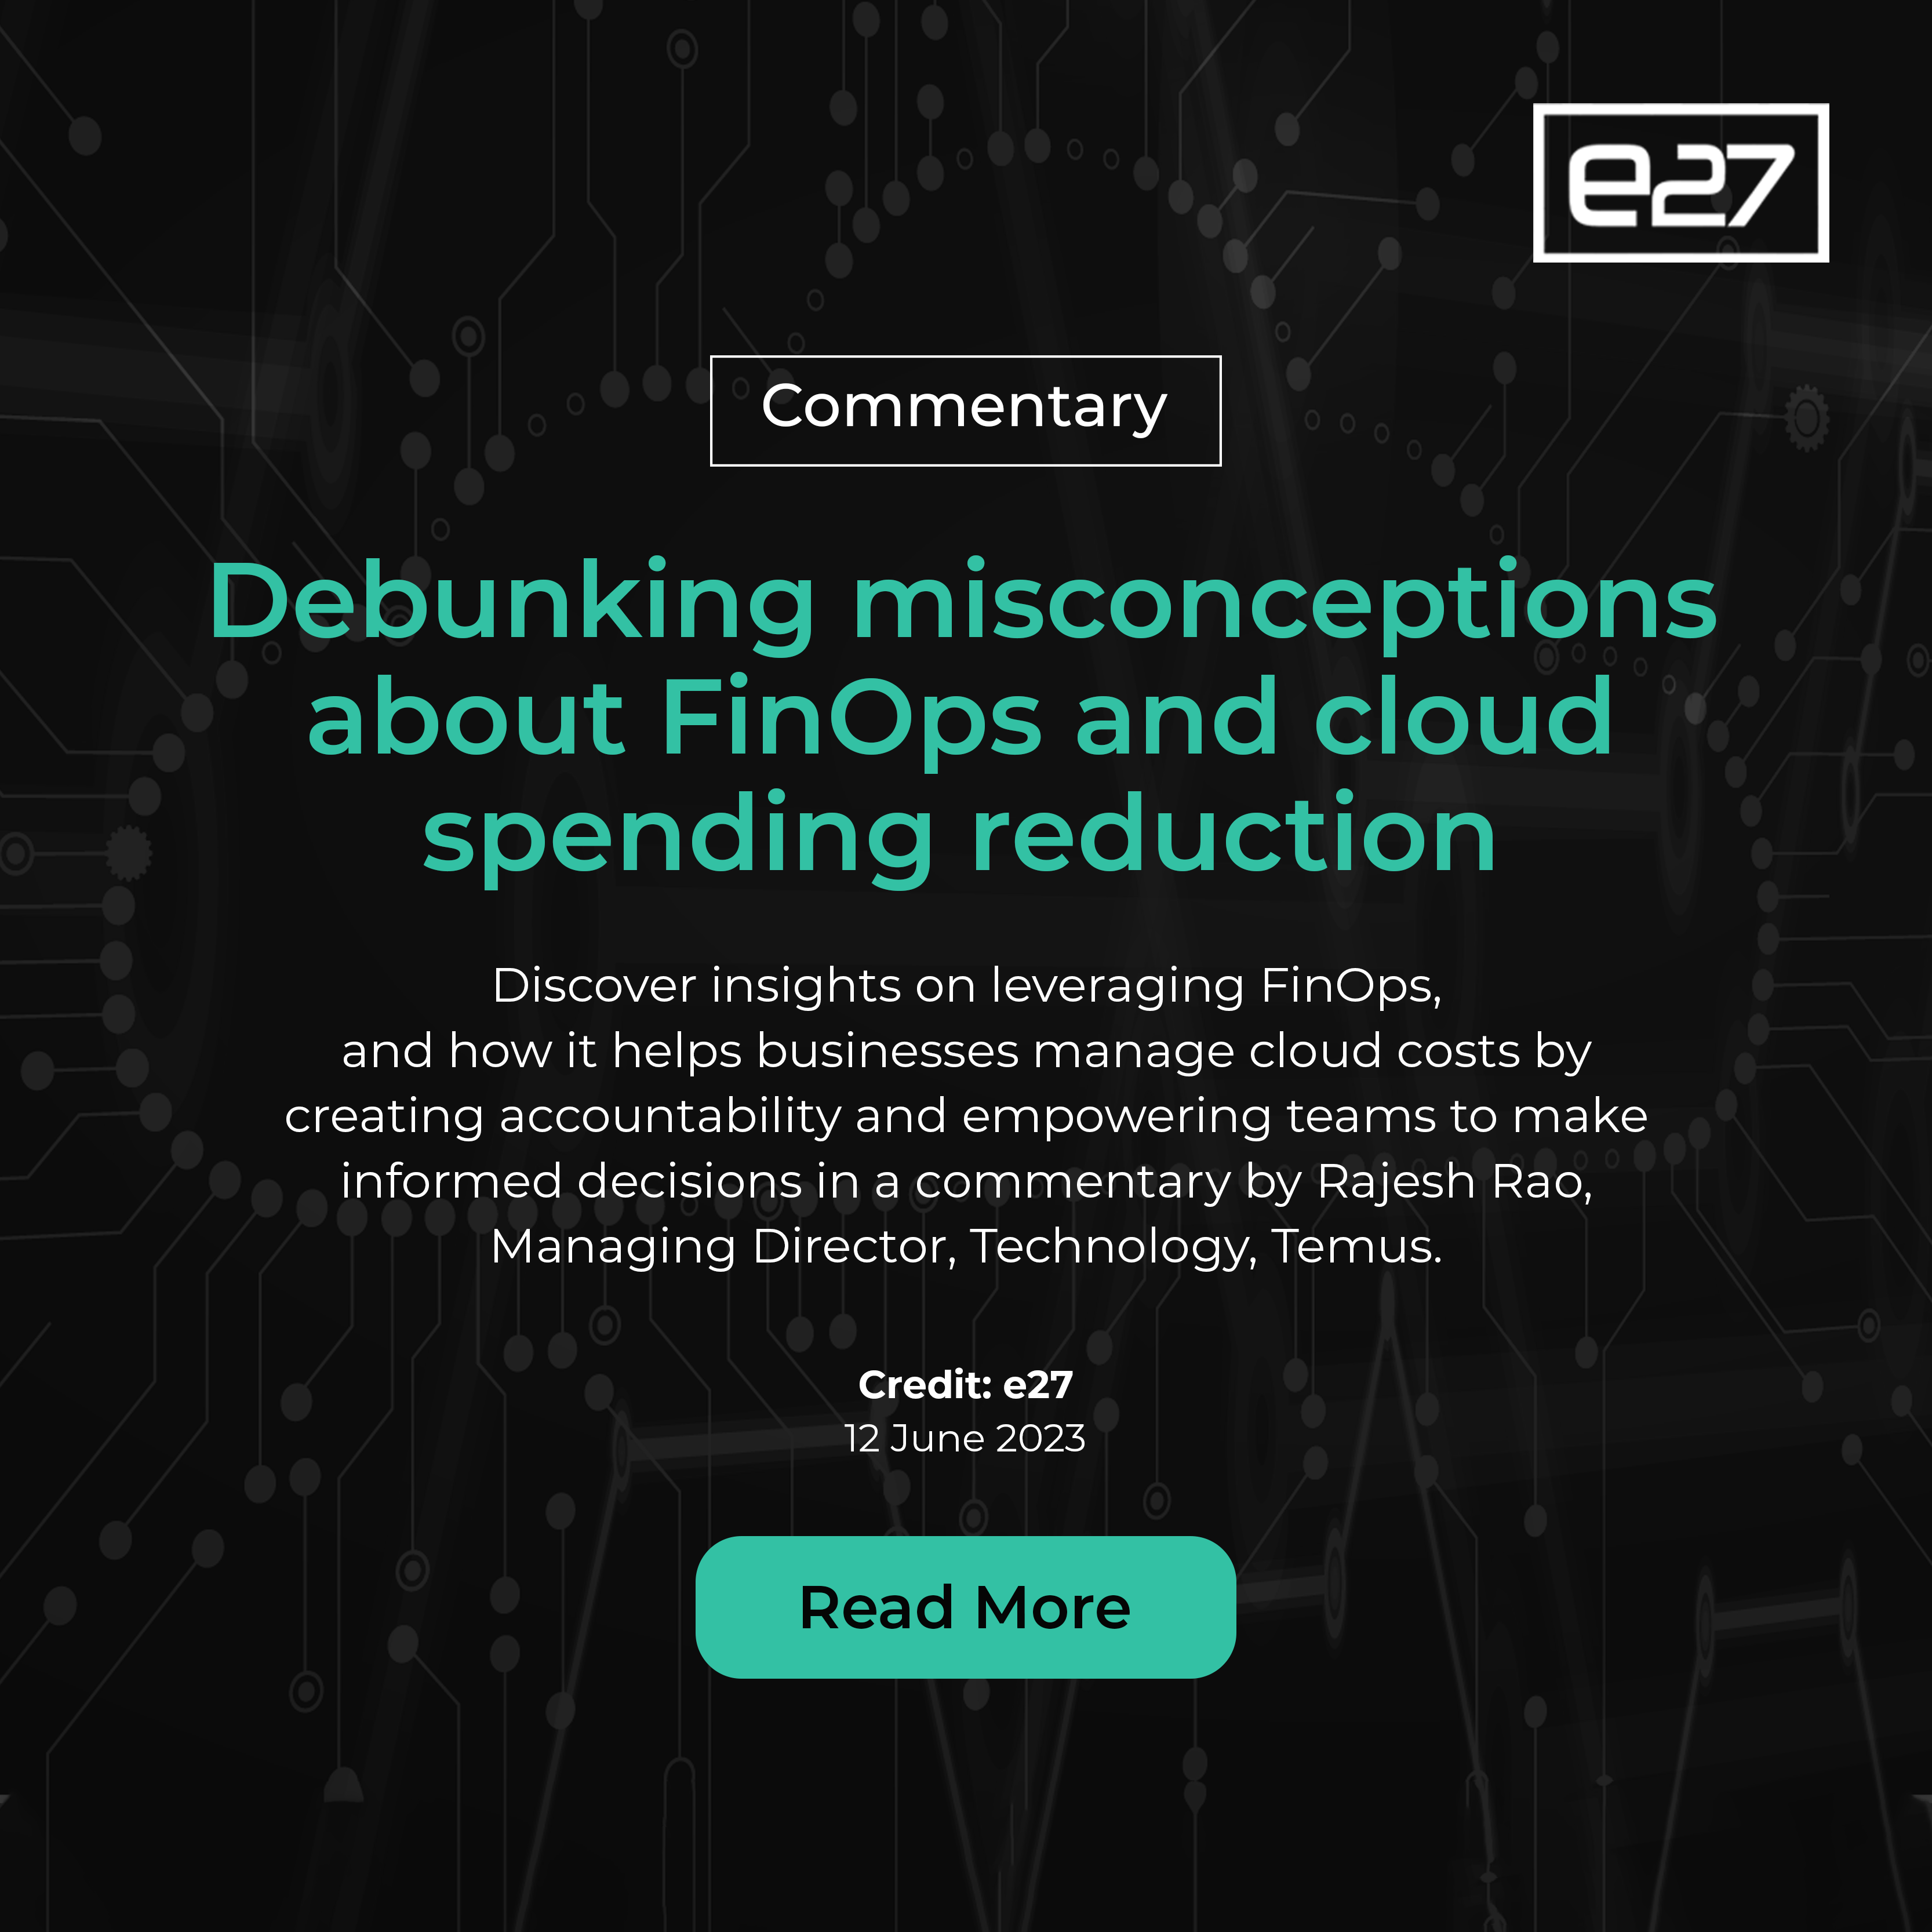 Commentary (e27): Debunking misconceptions about FinOps and cloud spending reduction